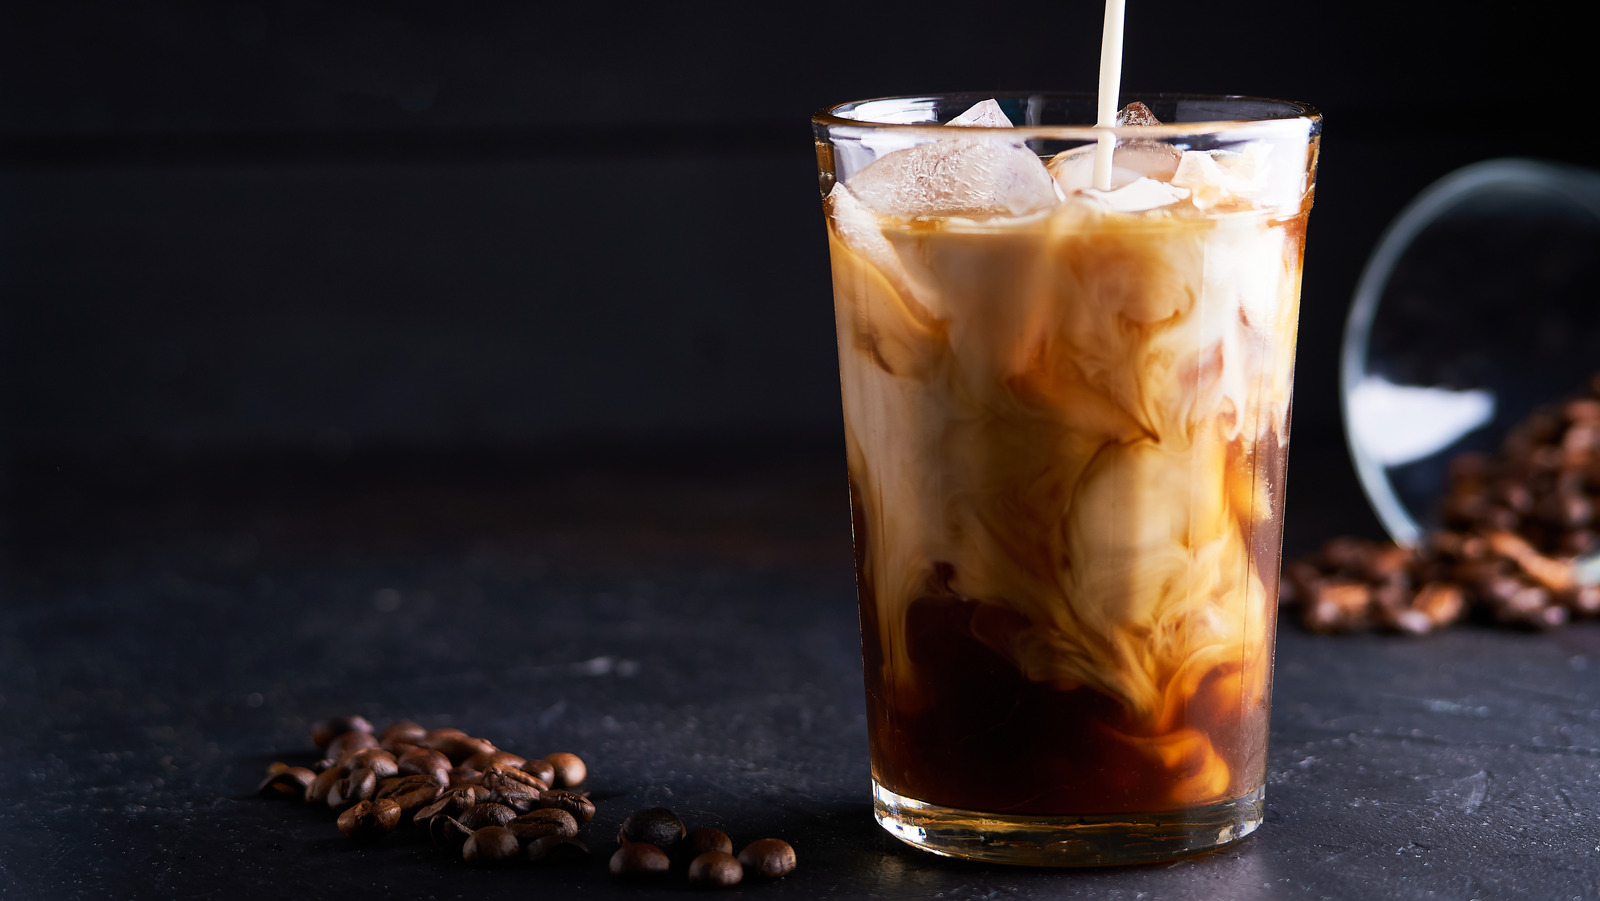 Change Up Your Iced Coffee's Ice Cubes